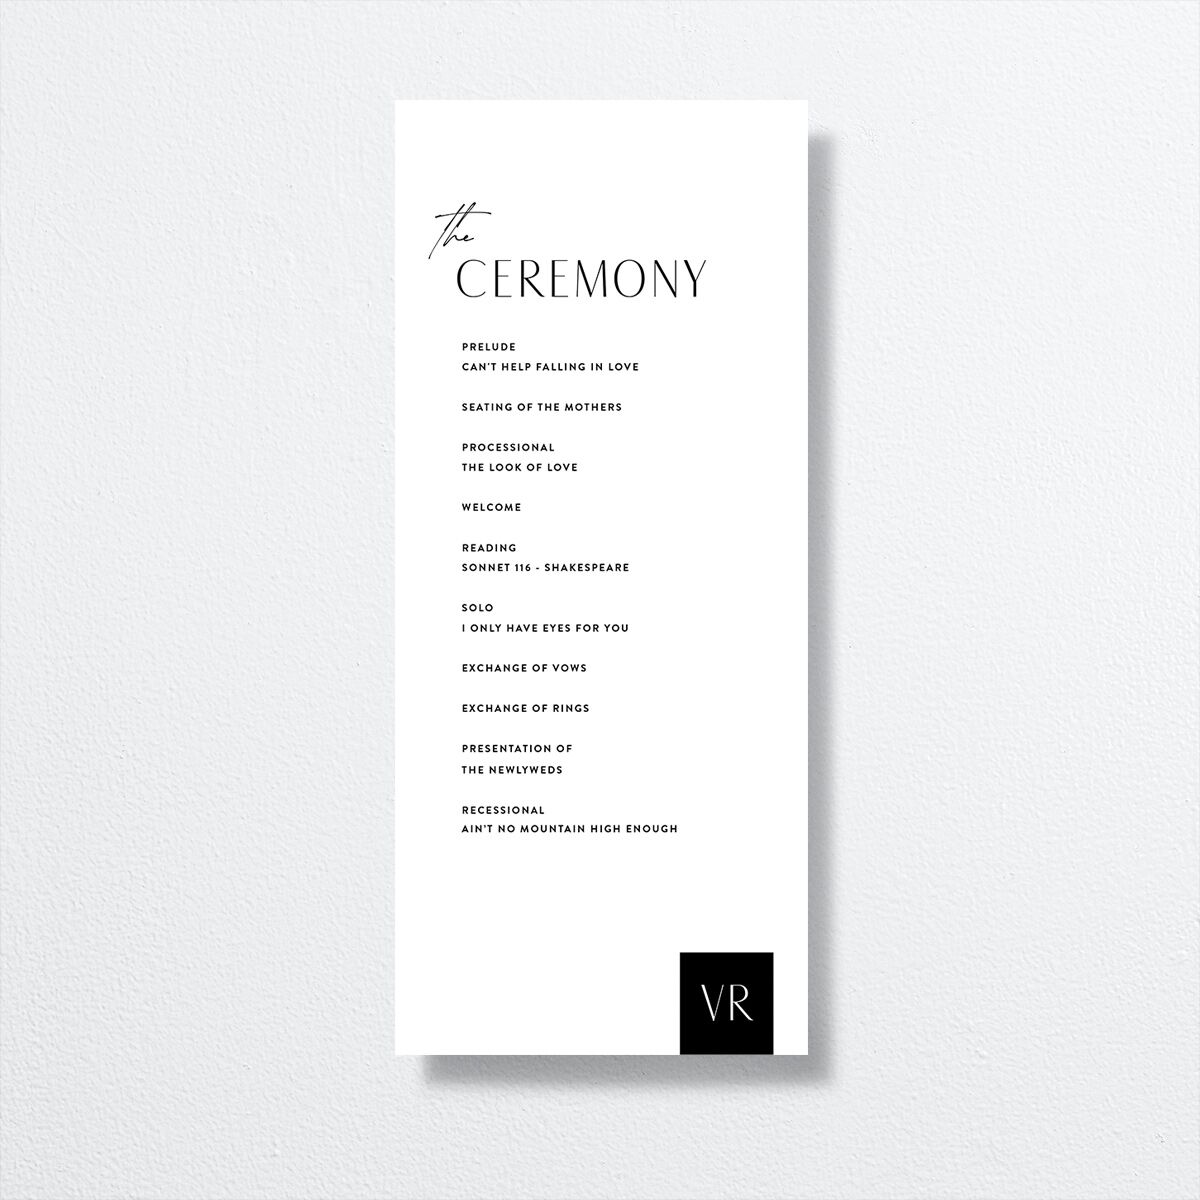 Our Time Wedding Programs by Vera Wang front